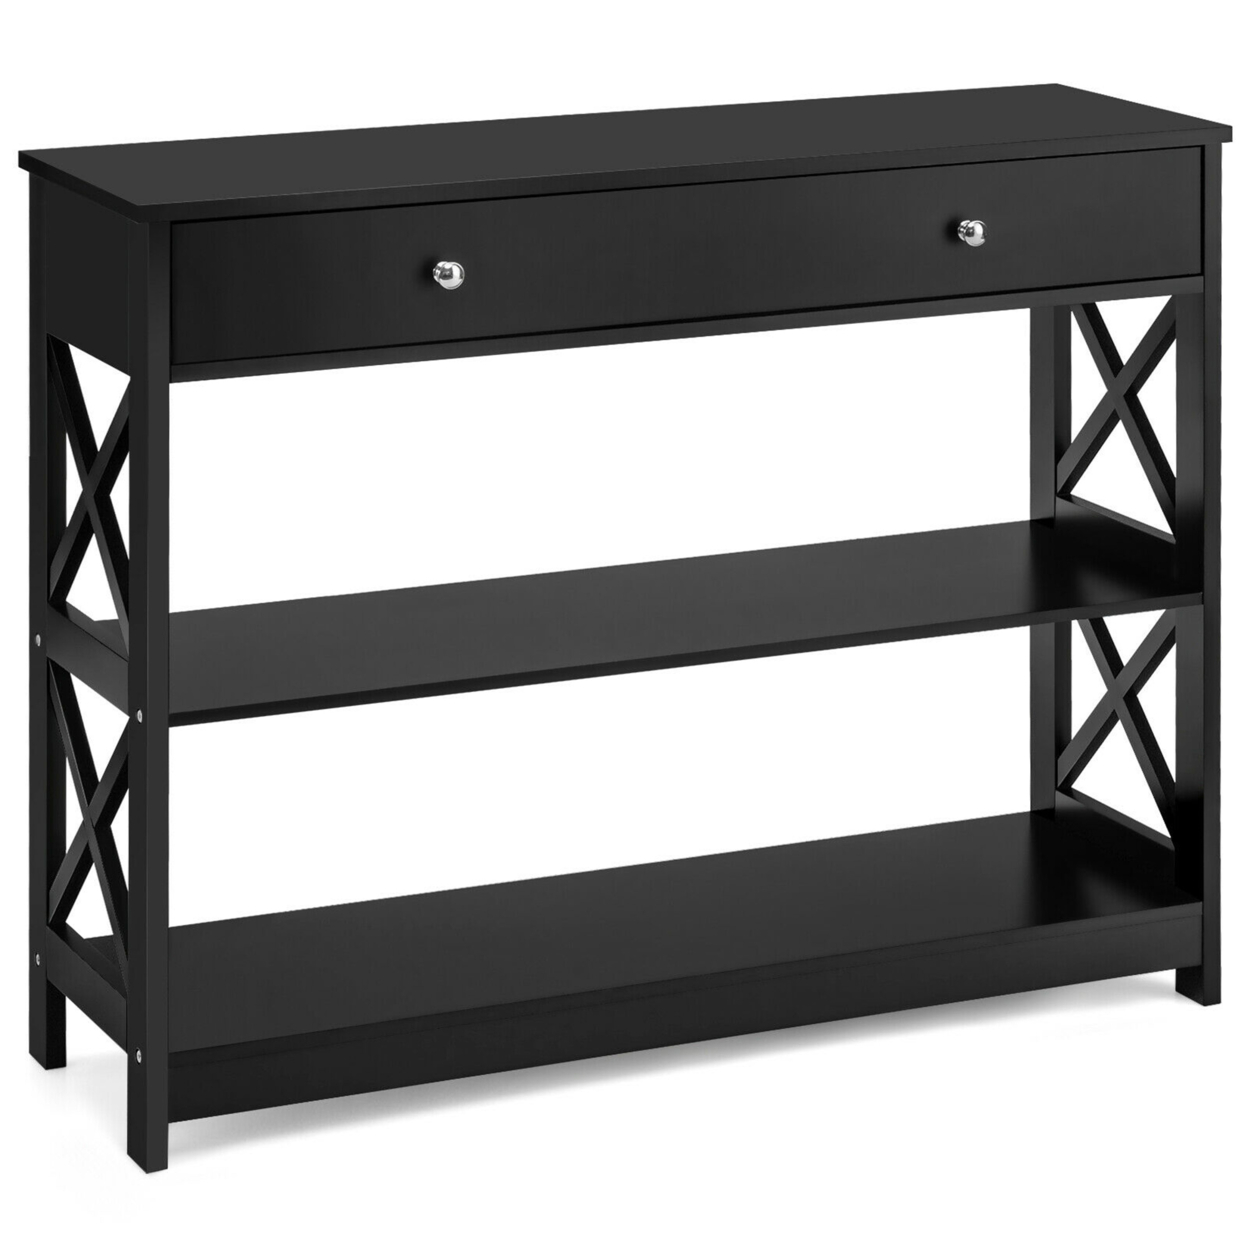 Console Table Drawer Shelves Sofa Accent Table Entryway Hallway Black/White - Black